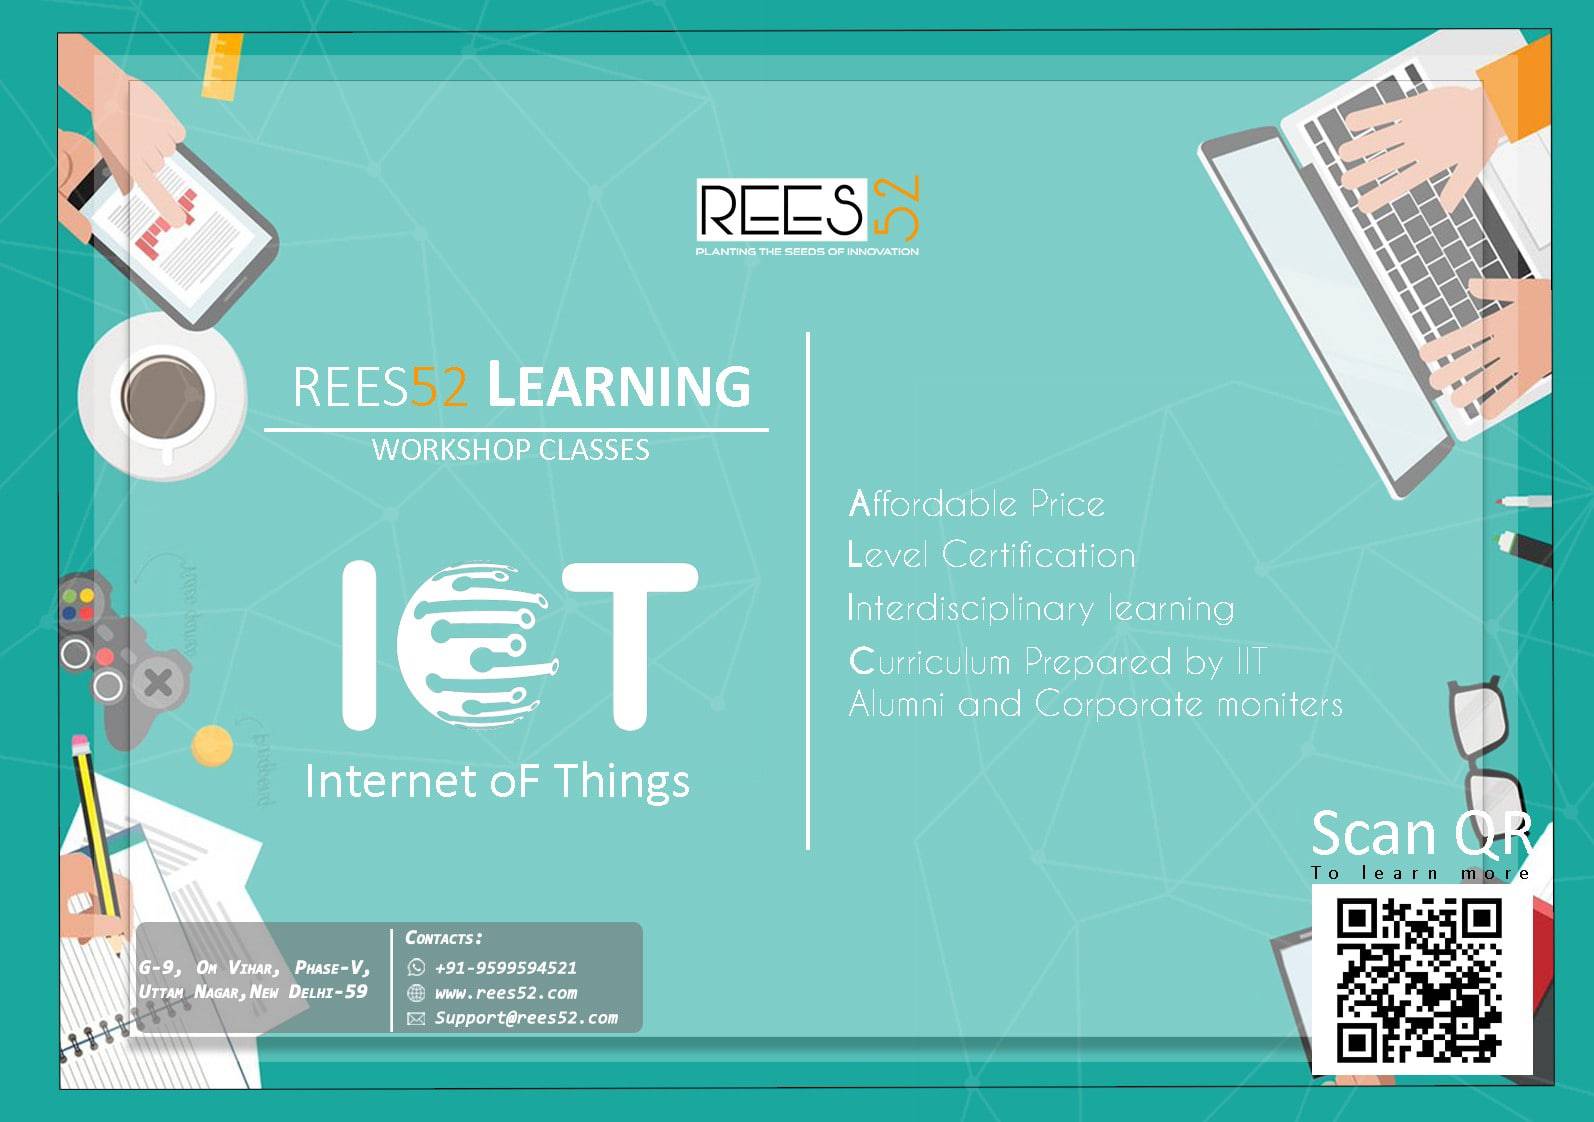 REES52 LEARNING Workshop classes (Training on the Internet of things) - REES52